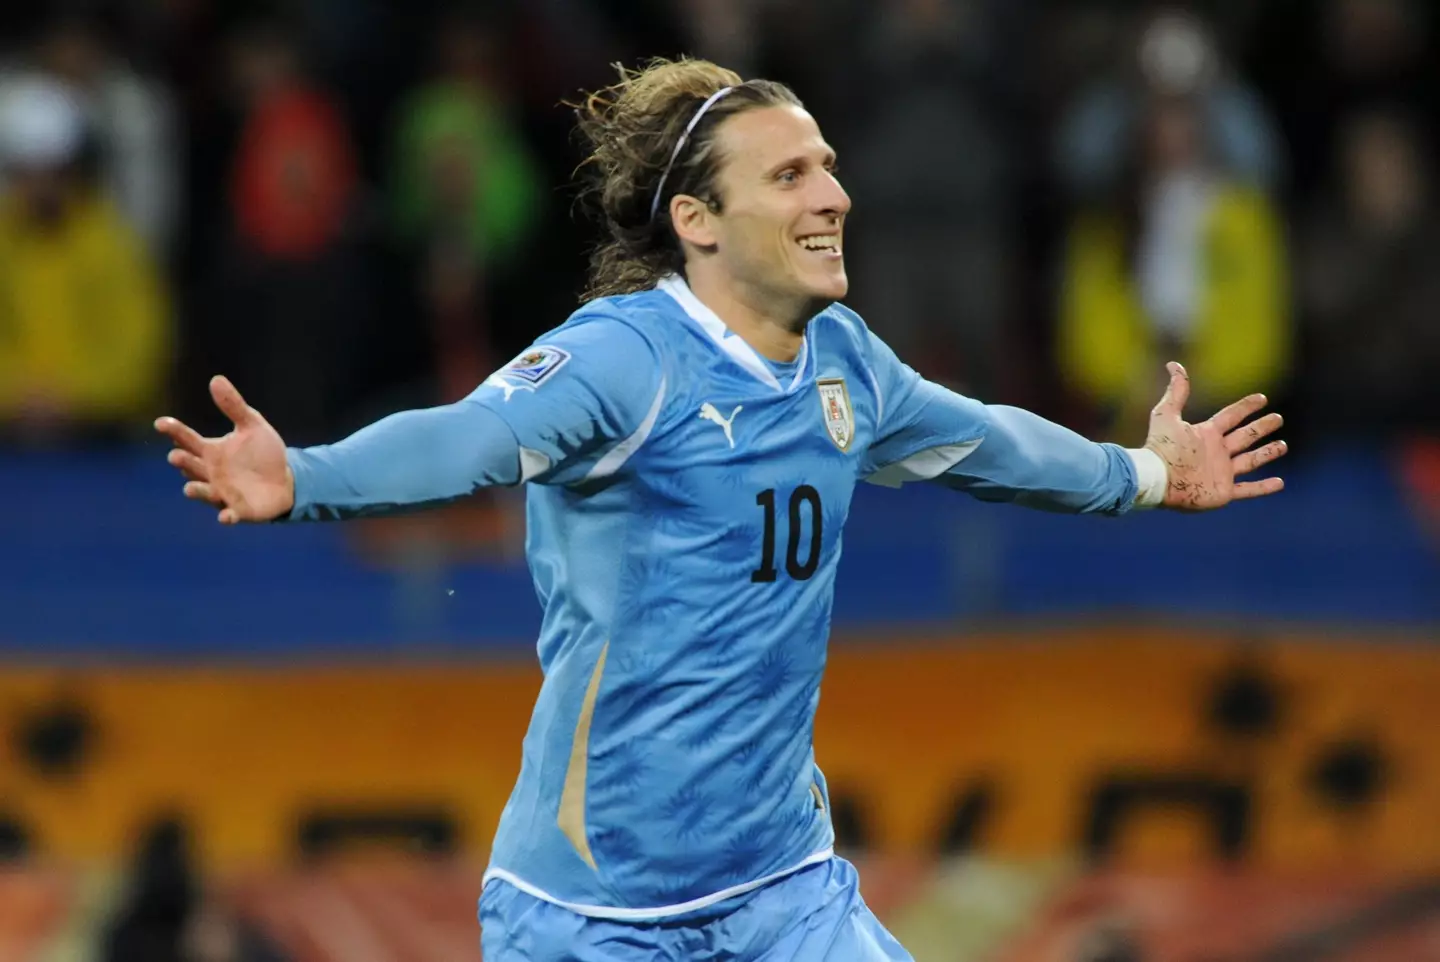 Uruguay's Diego Forlan was one of only a few players to master the Jabulani (Image: PA)